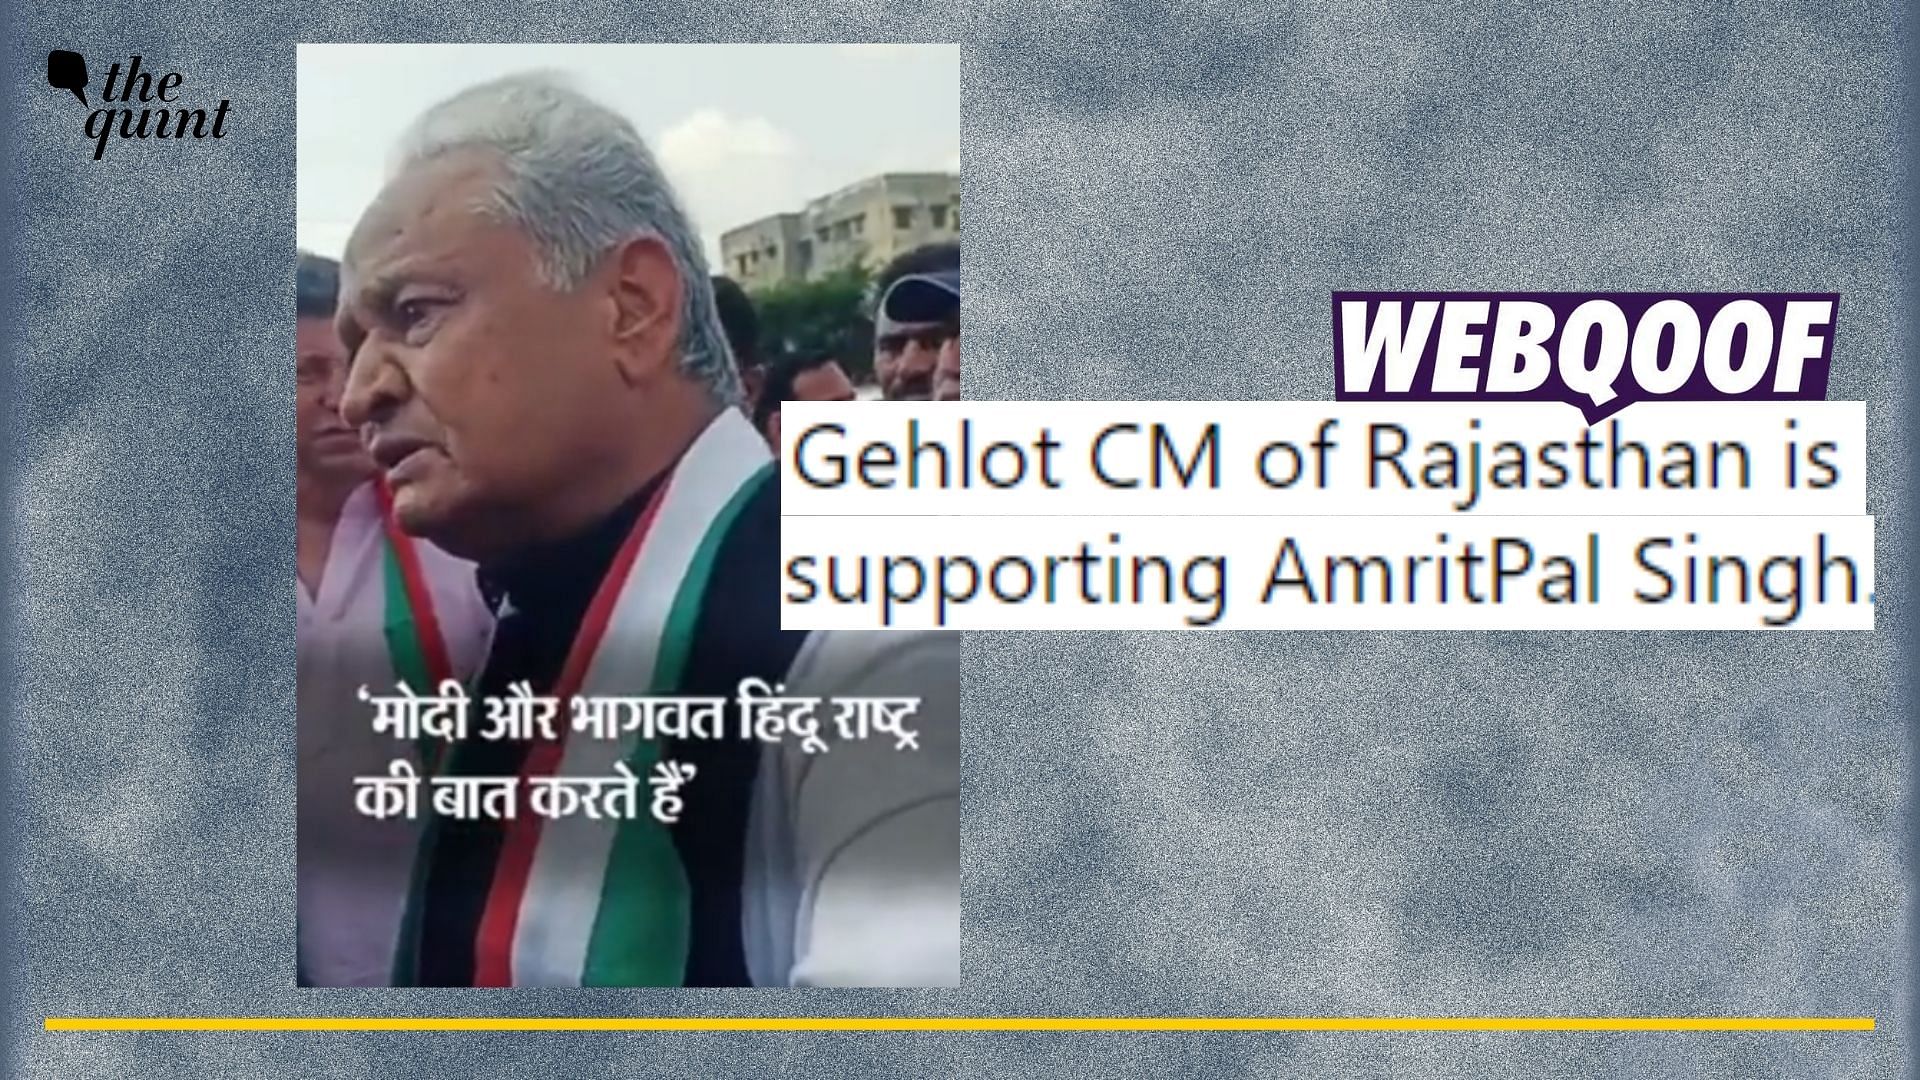 <div class="paragraphs"><p>Fact-check: A clipped video is going viral with a misleading claim about Rajasthan CM Ashok Gehlot supporting Amritpal Singh. </p></div>